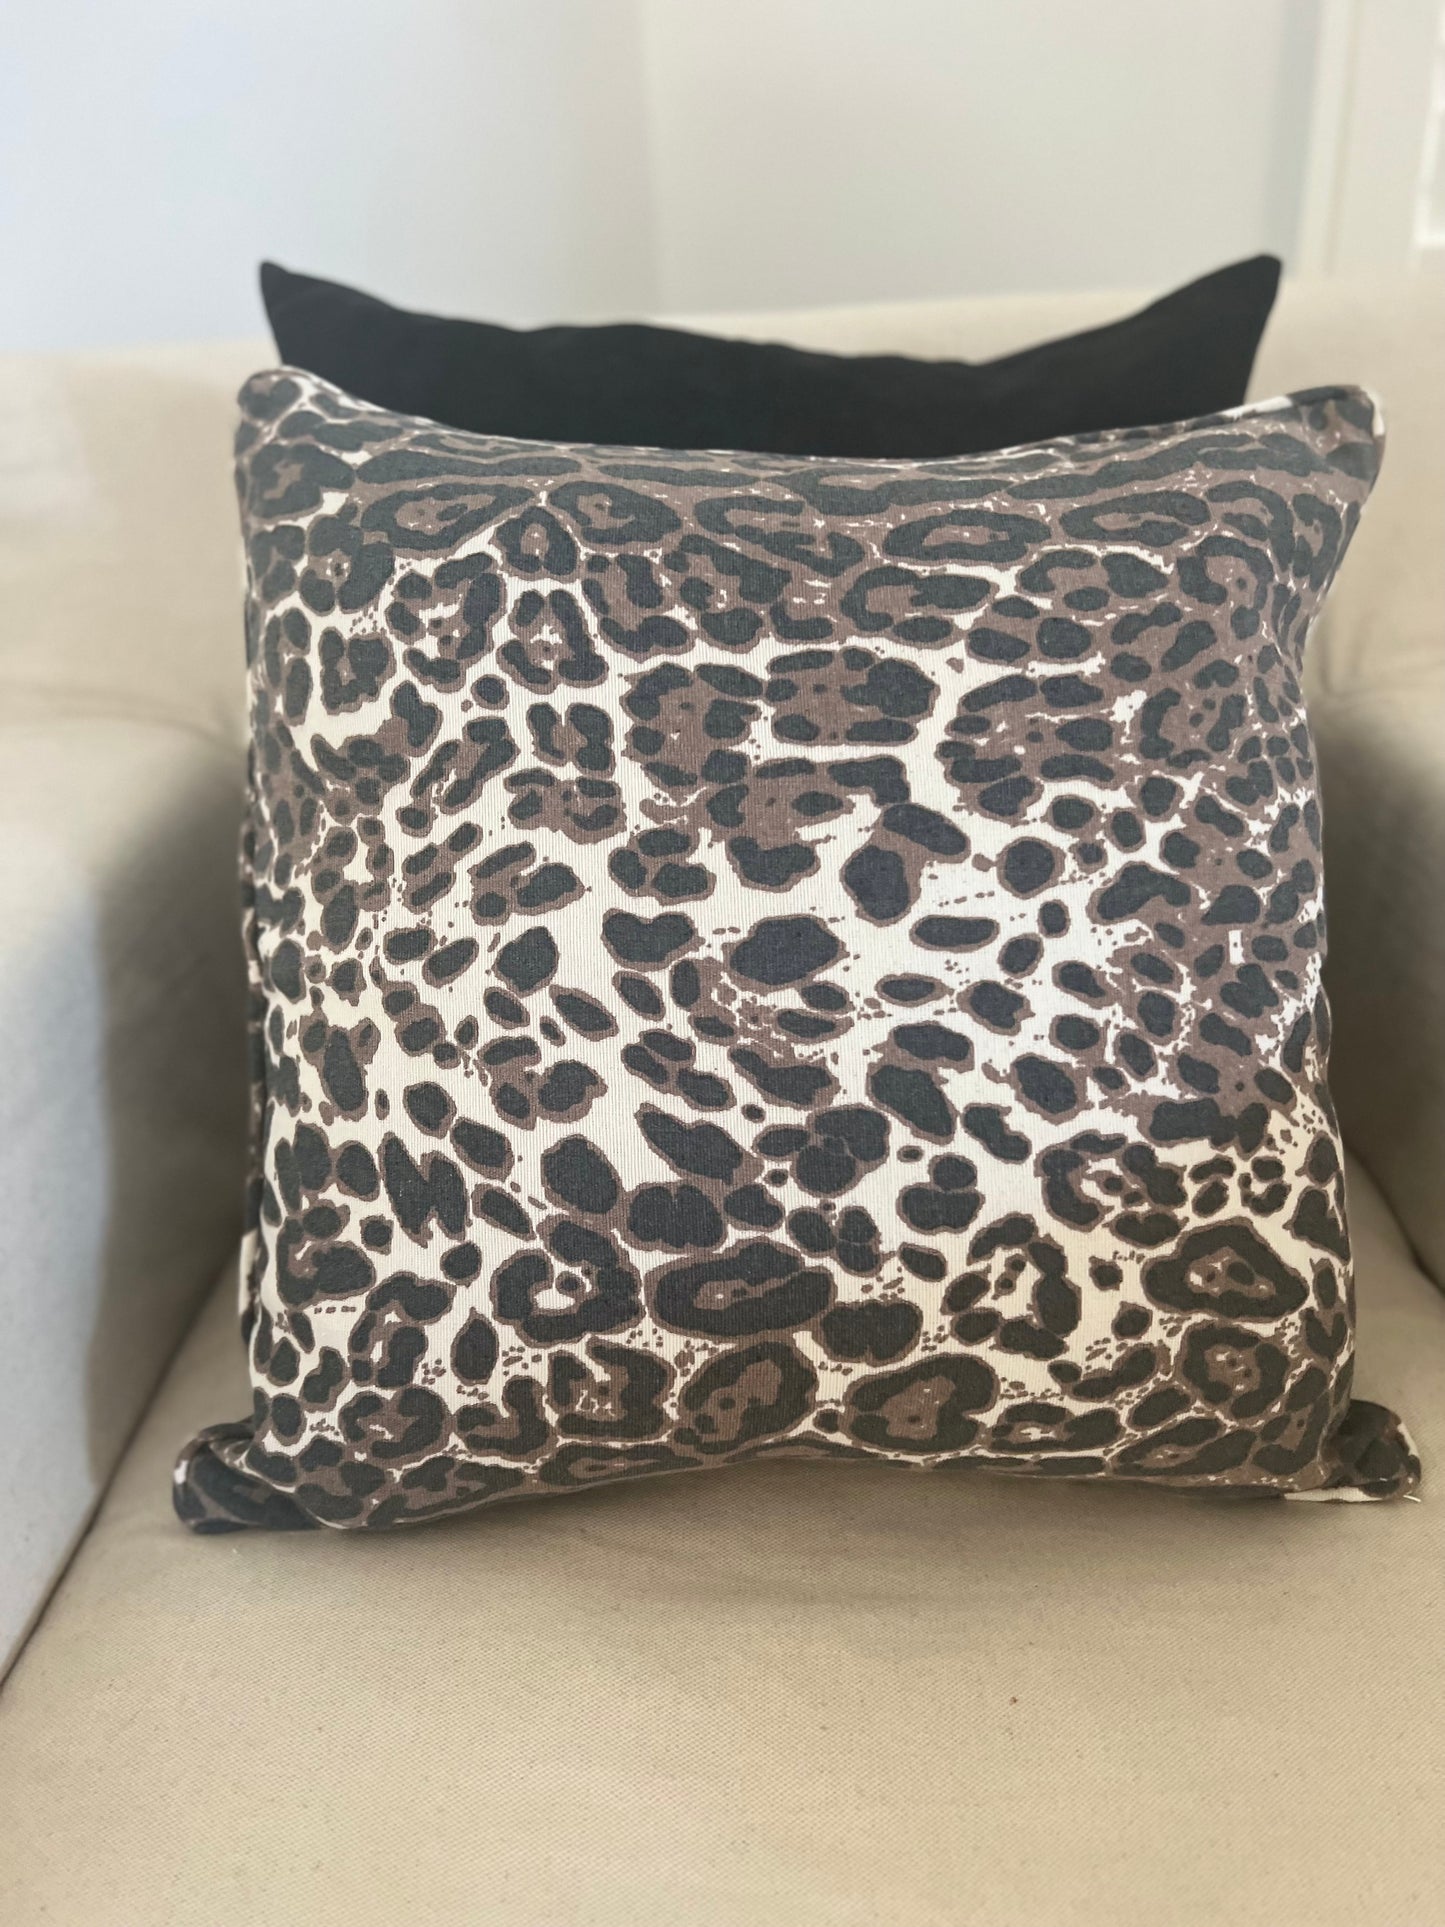 Big Cat Black and White cushion cover